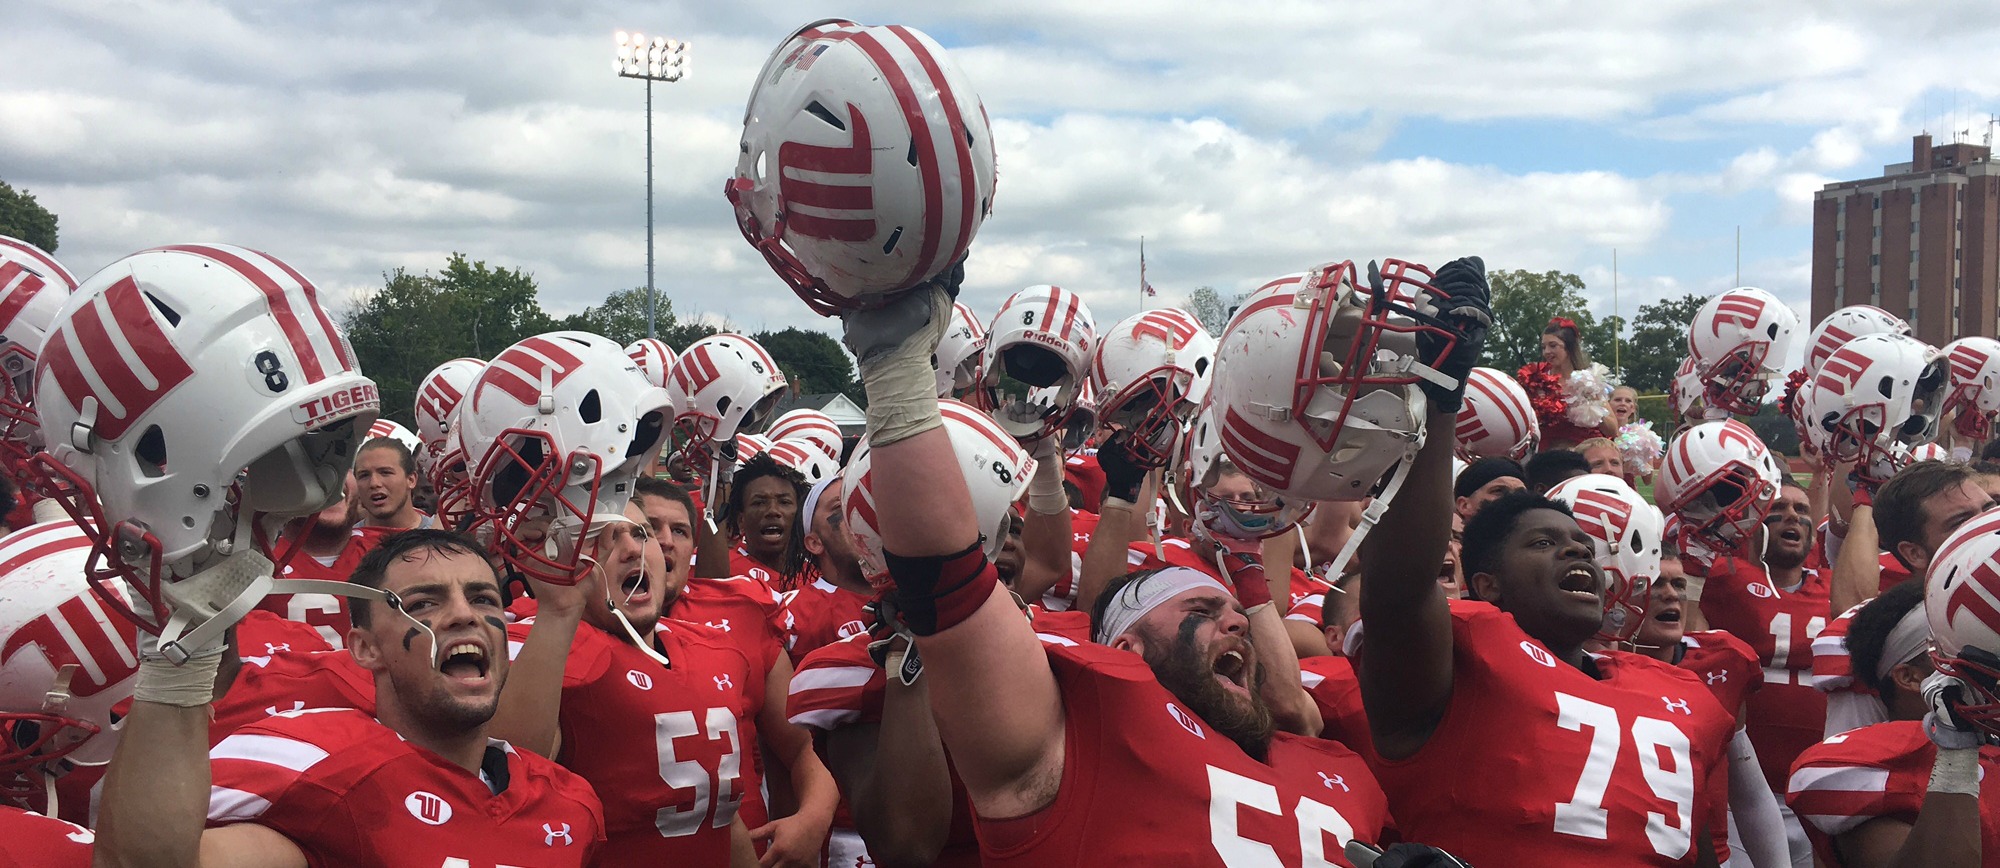 #20 Wittenberg Halts #10 Wabash Behind 24 Unanswered Points and Stout Defense